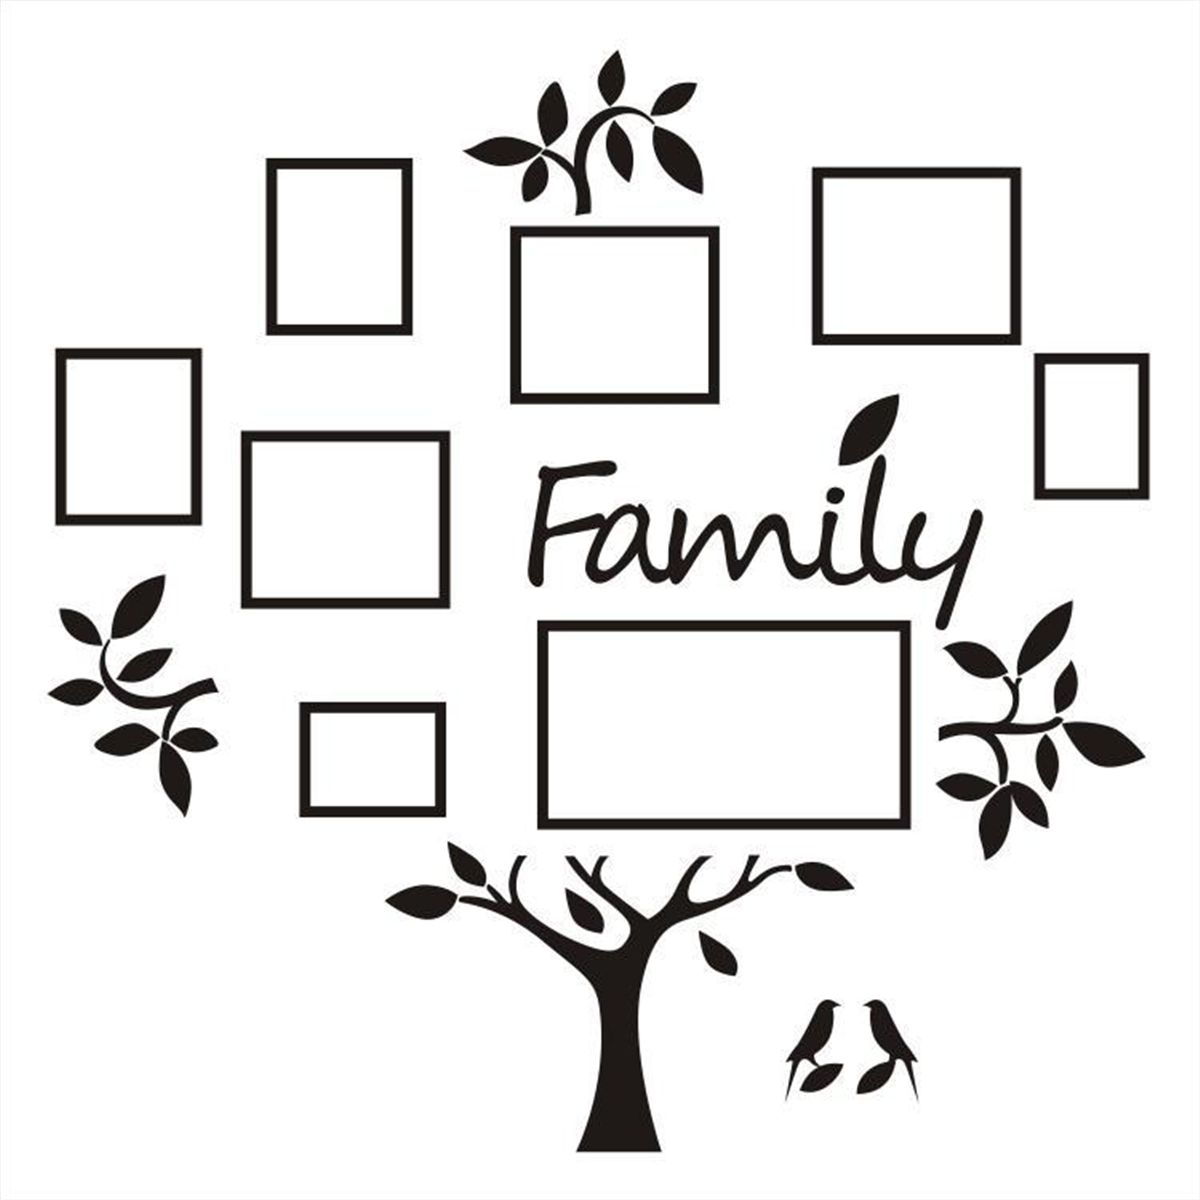 3D-Family-Tree-Acrylic-Photo-Picture-Collage-Frame-Set-Wall-Home-Decor-Xmas-Gift-1638946